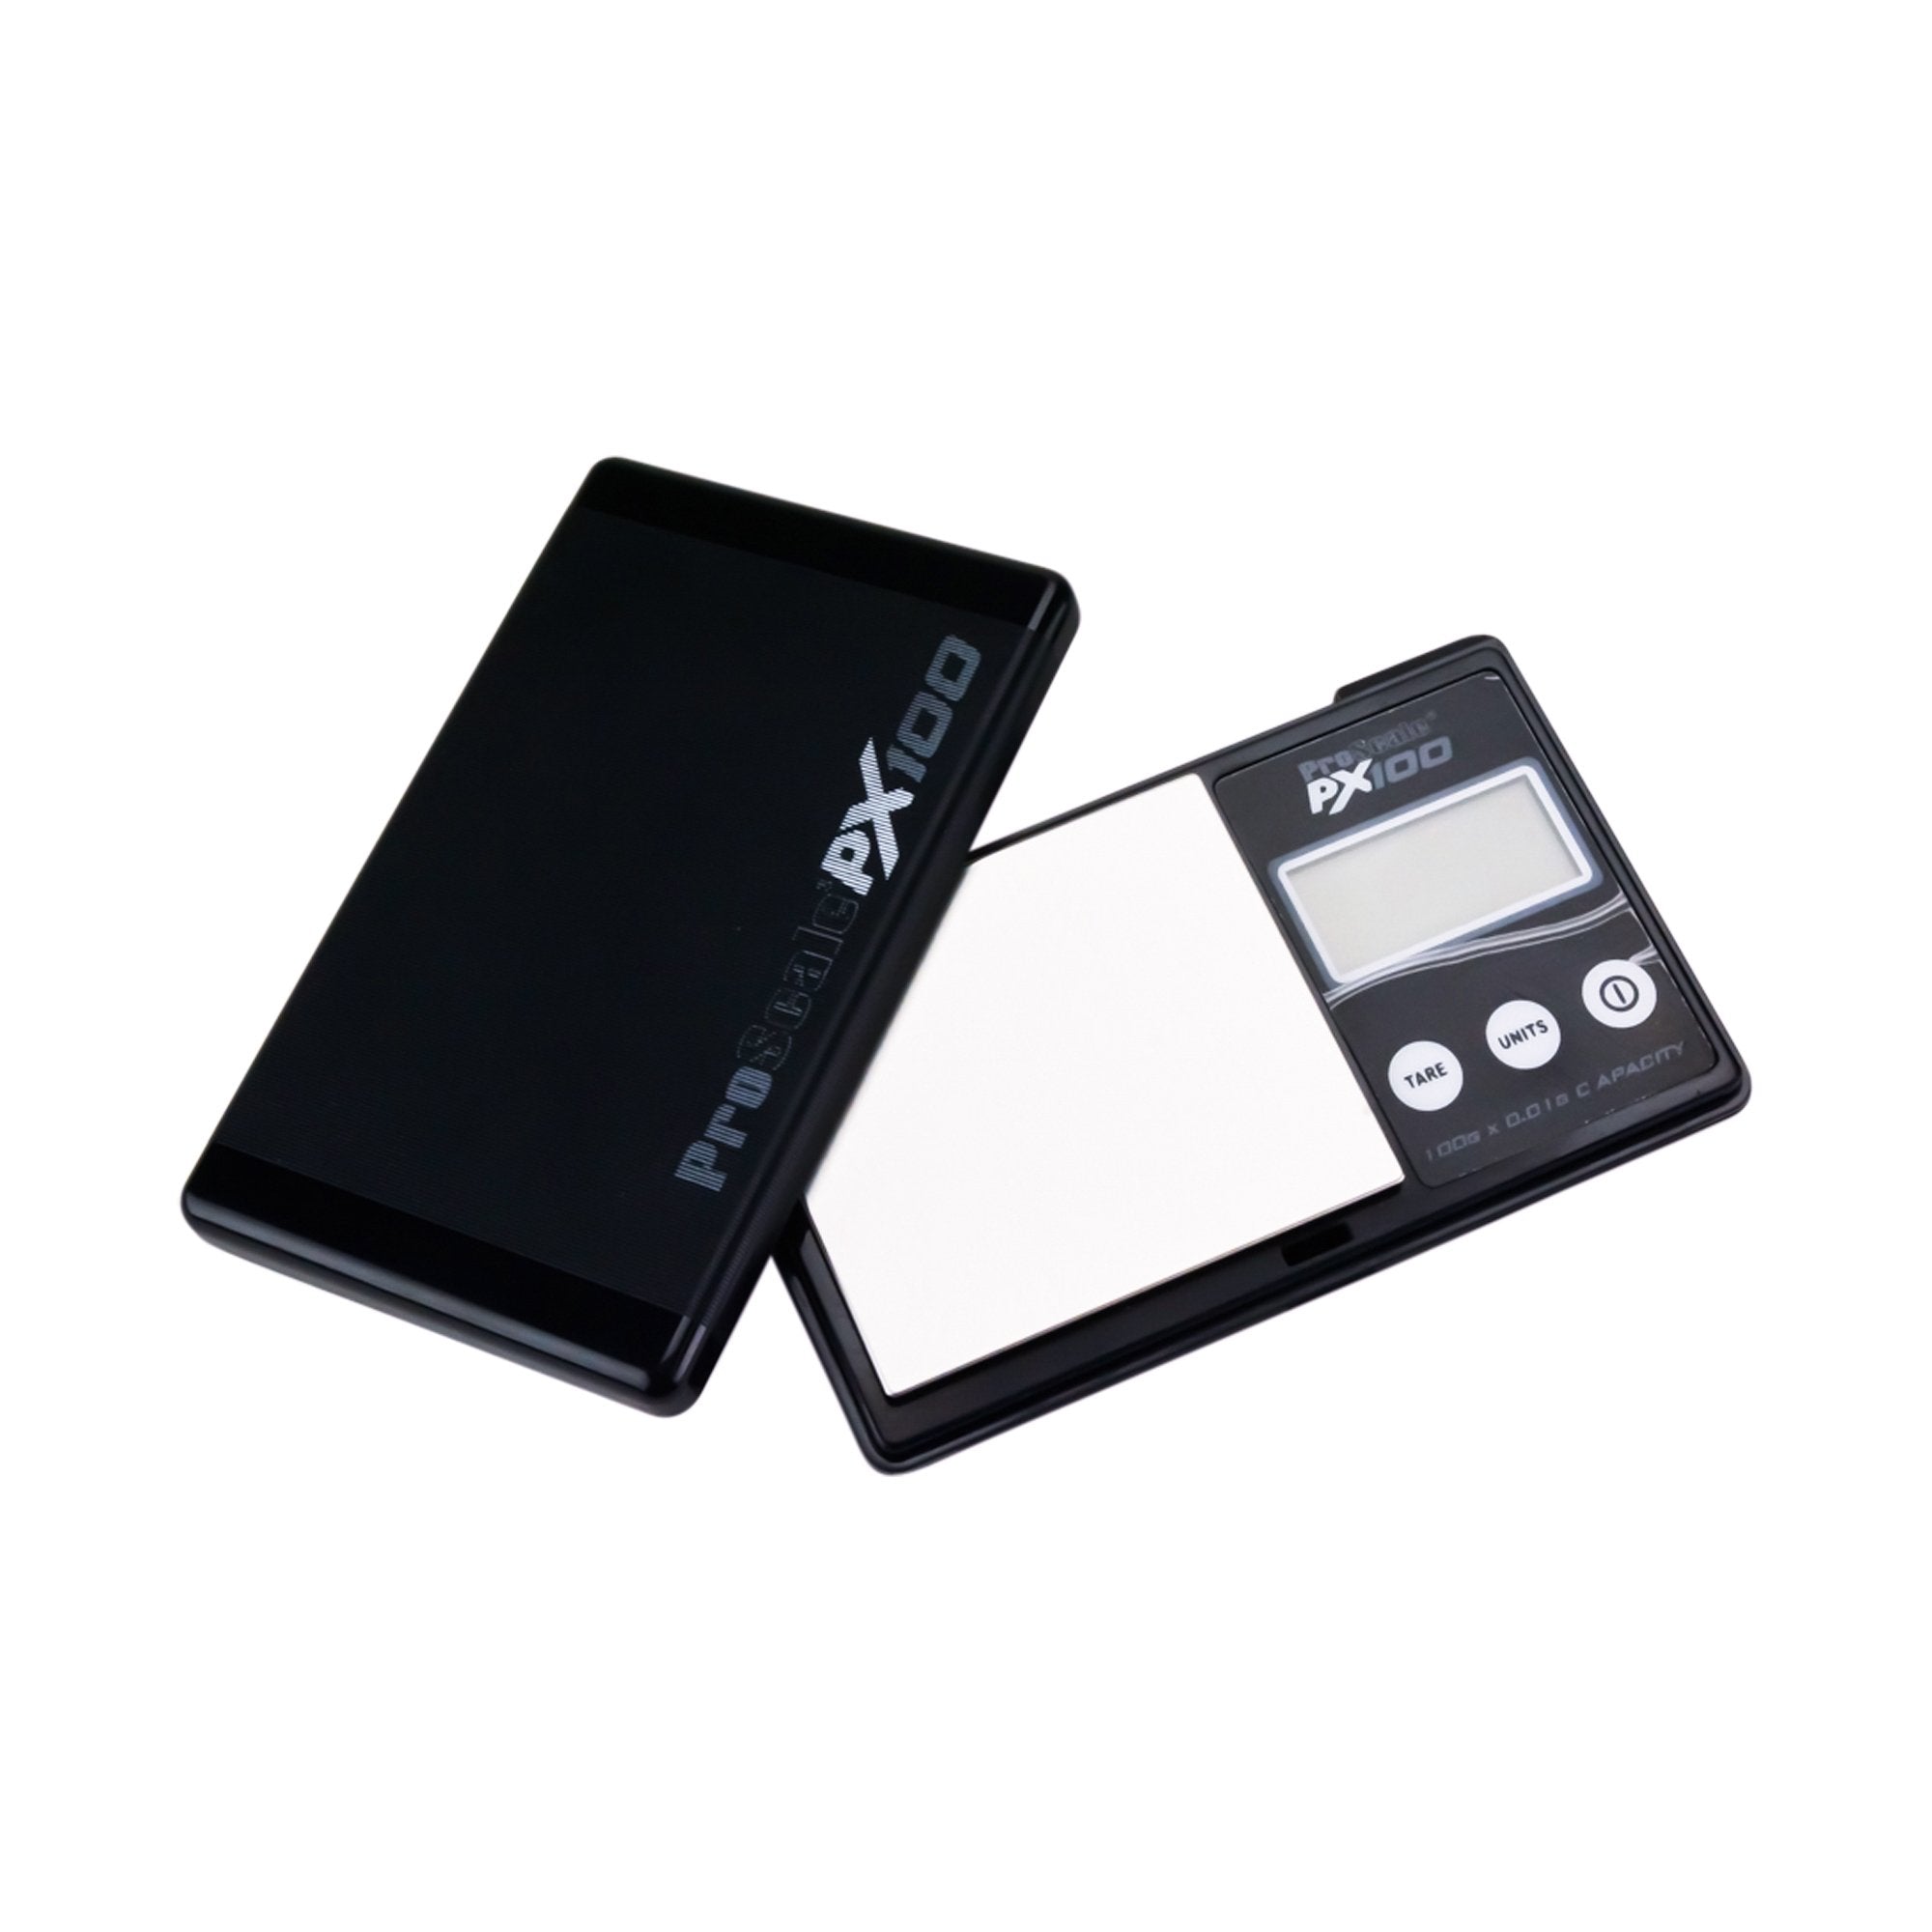 PRO SCALE | PX100 Digital Scale | 100g Capacity - 0.01g Readability - 1